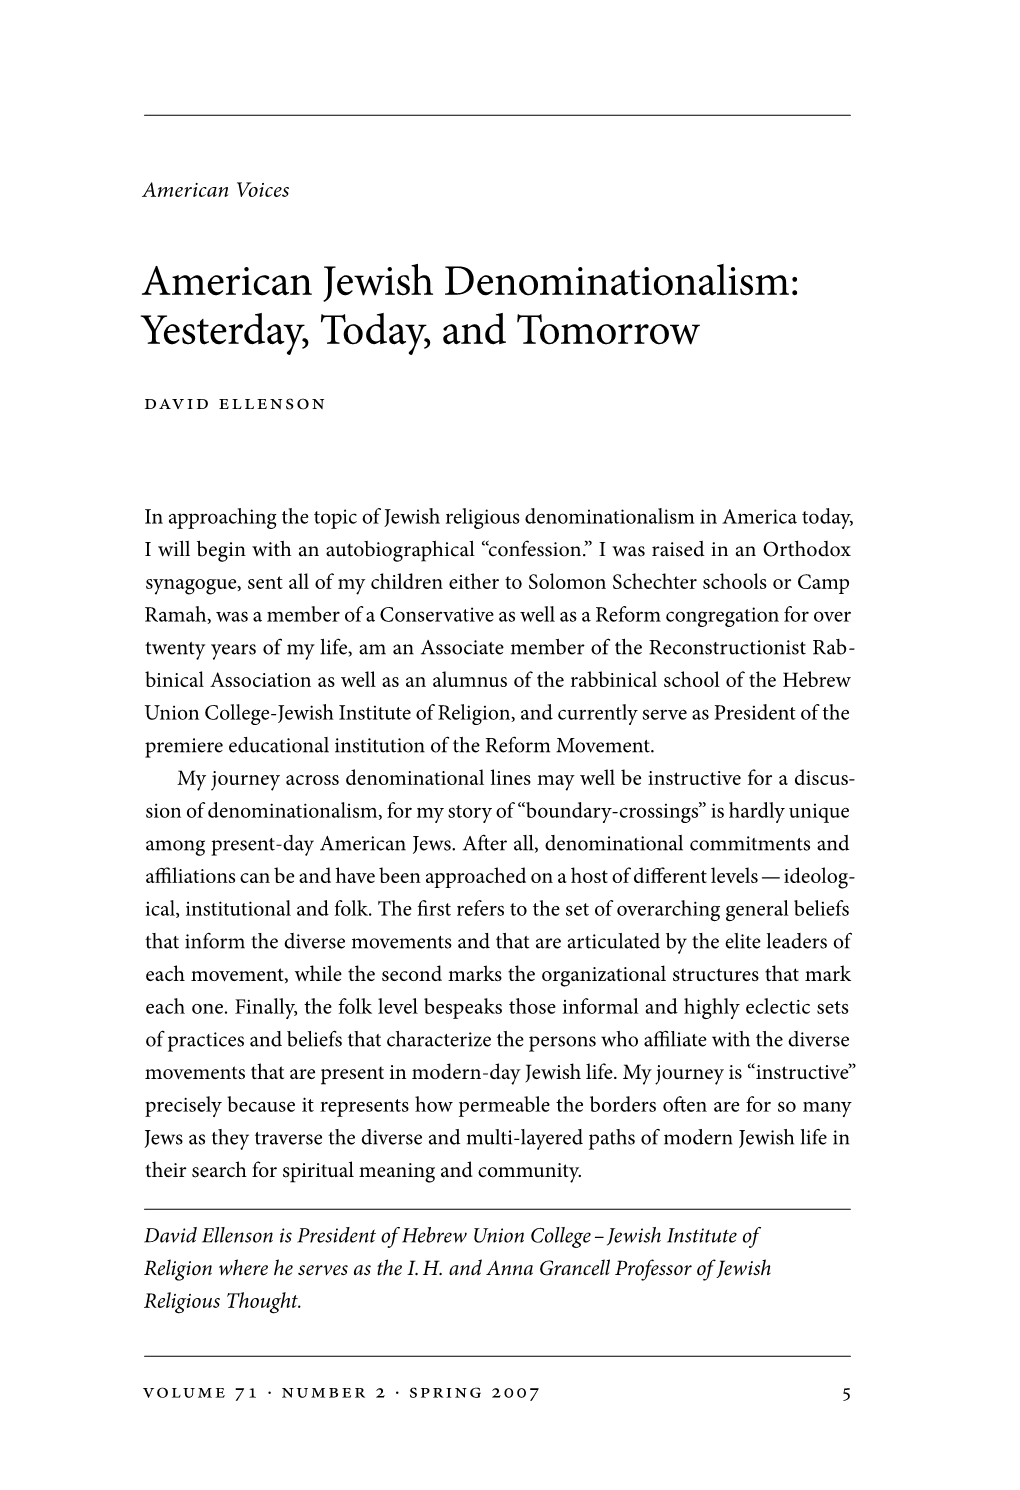 American Jewish Denominationalism: Yesterday, Today, and Tomorrow